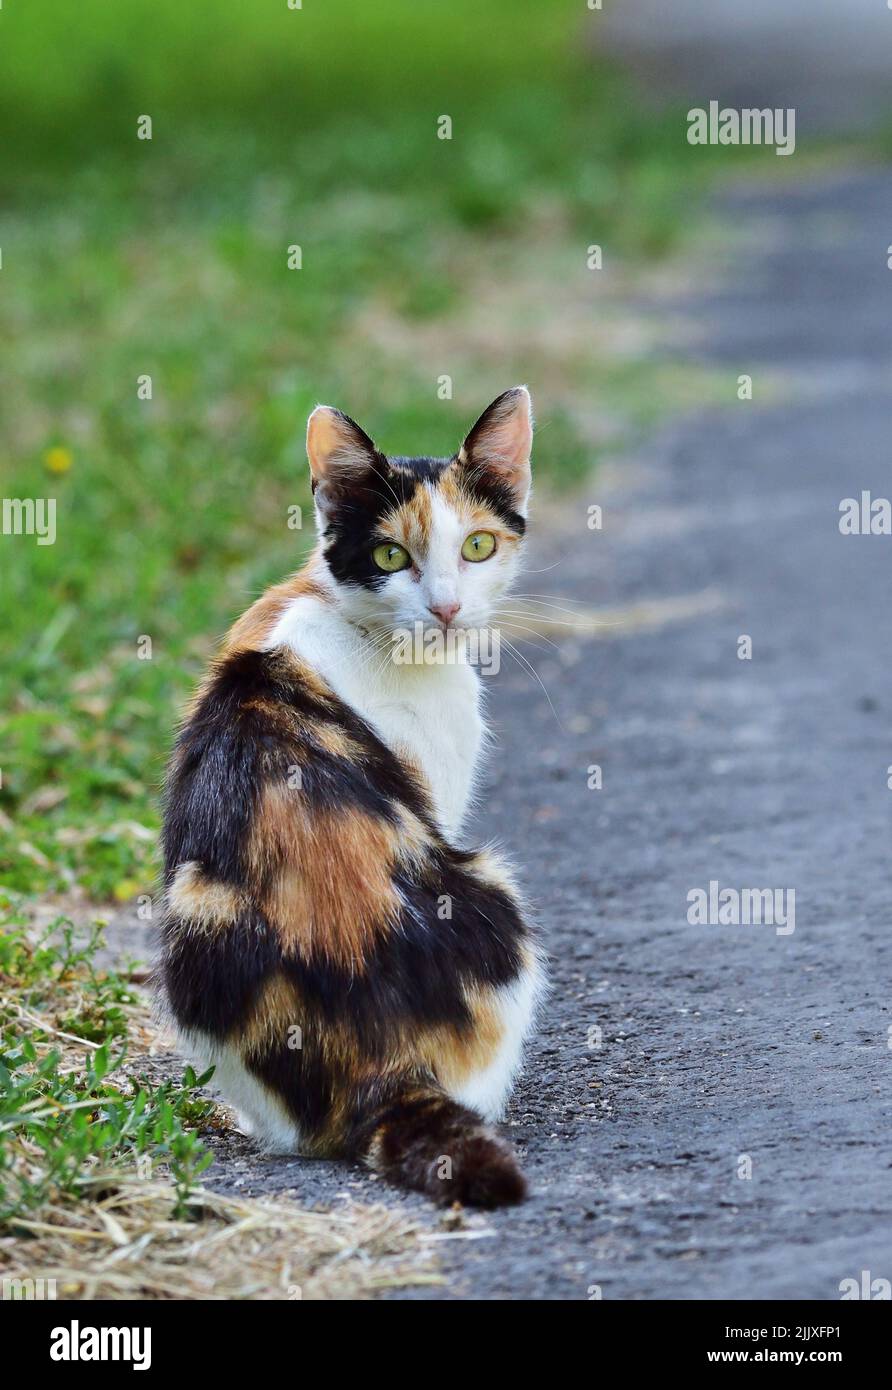 Calico cat sitting on the street Stock Photo